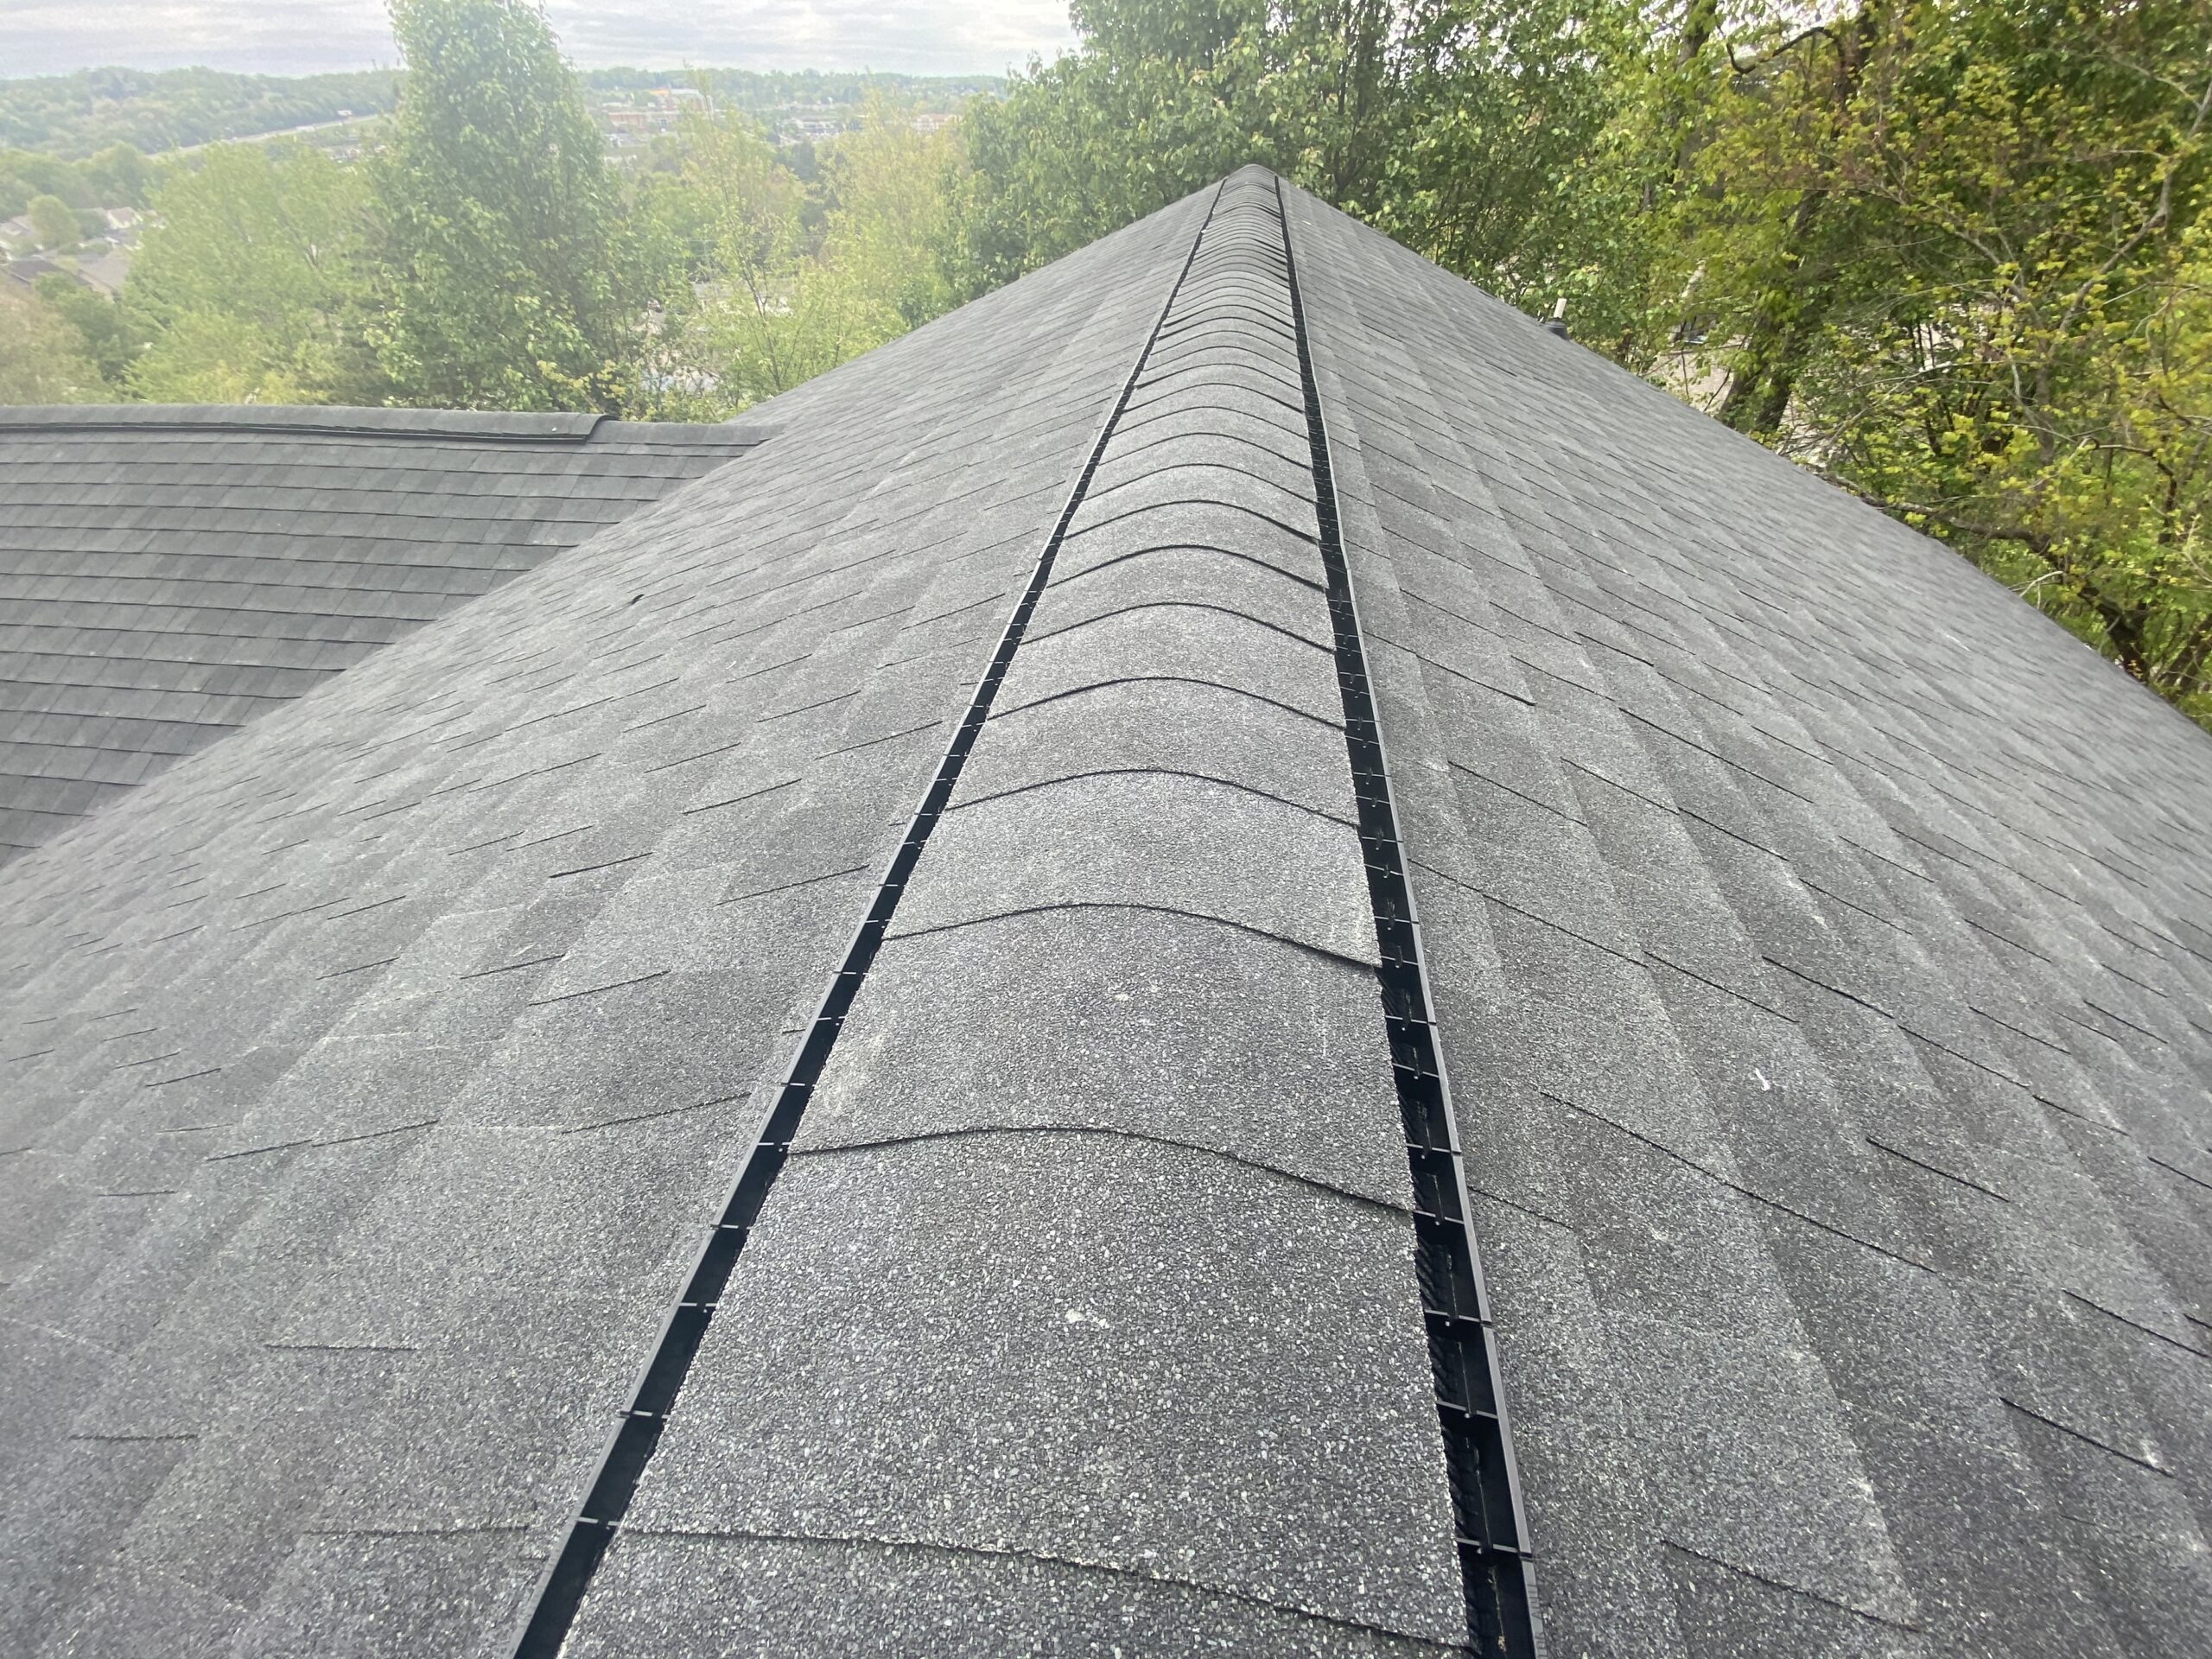 This is a picture of a ridge vent with ridge cap shingles